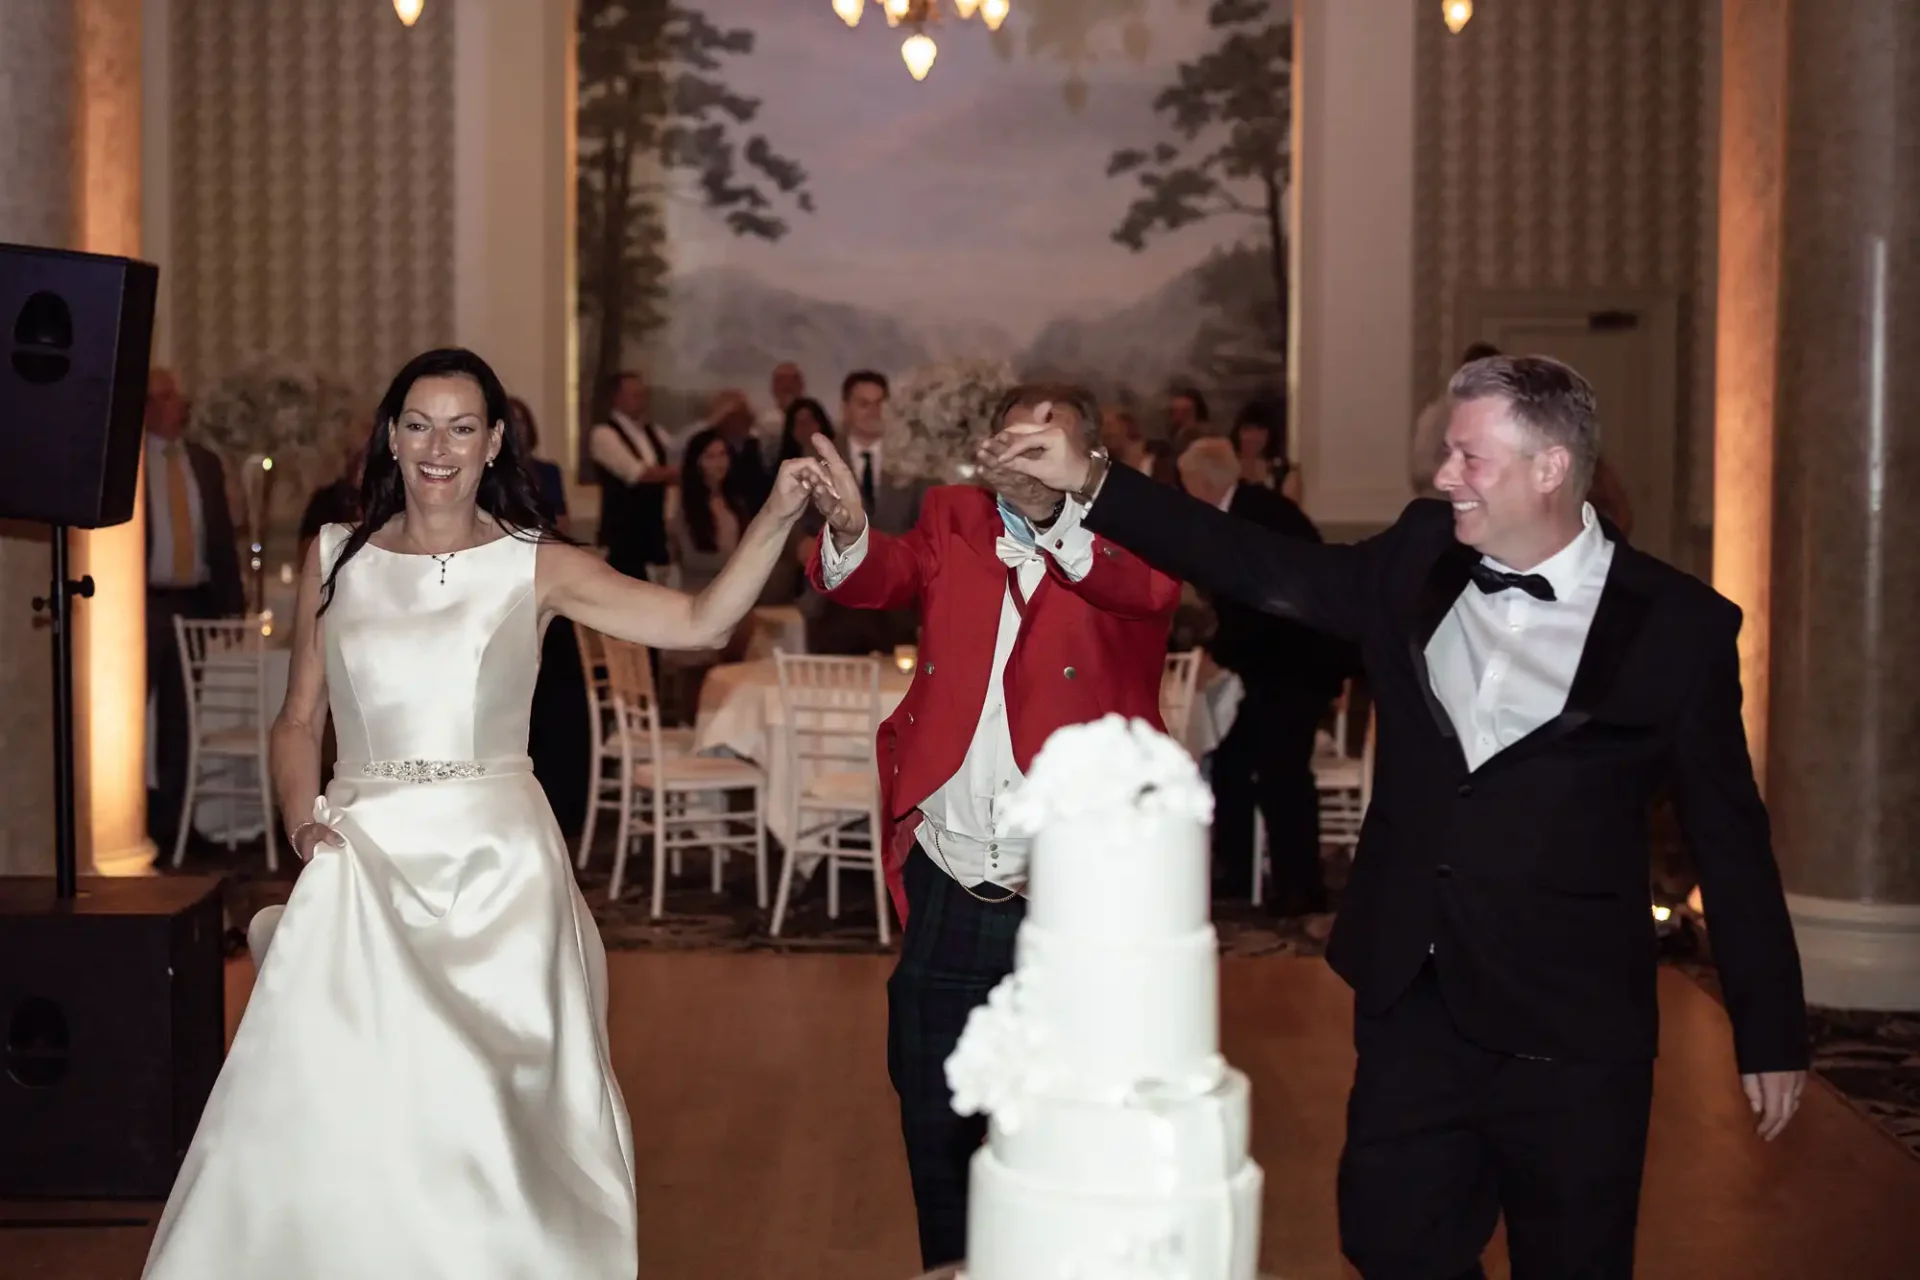 A joyful bride and groom dancing at their wedding reception with a guest wearing a red jacket, near a white wedding cake.